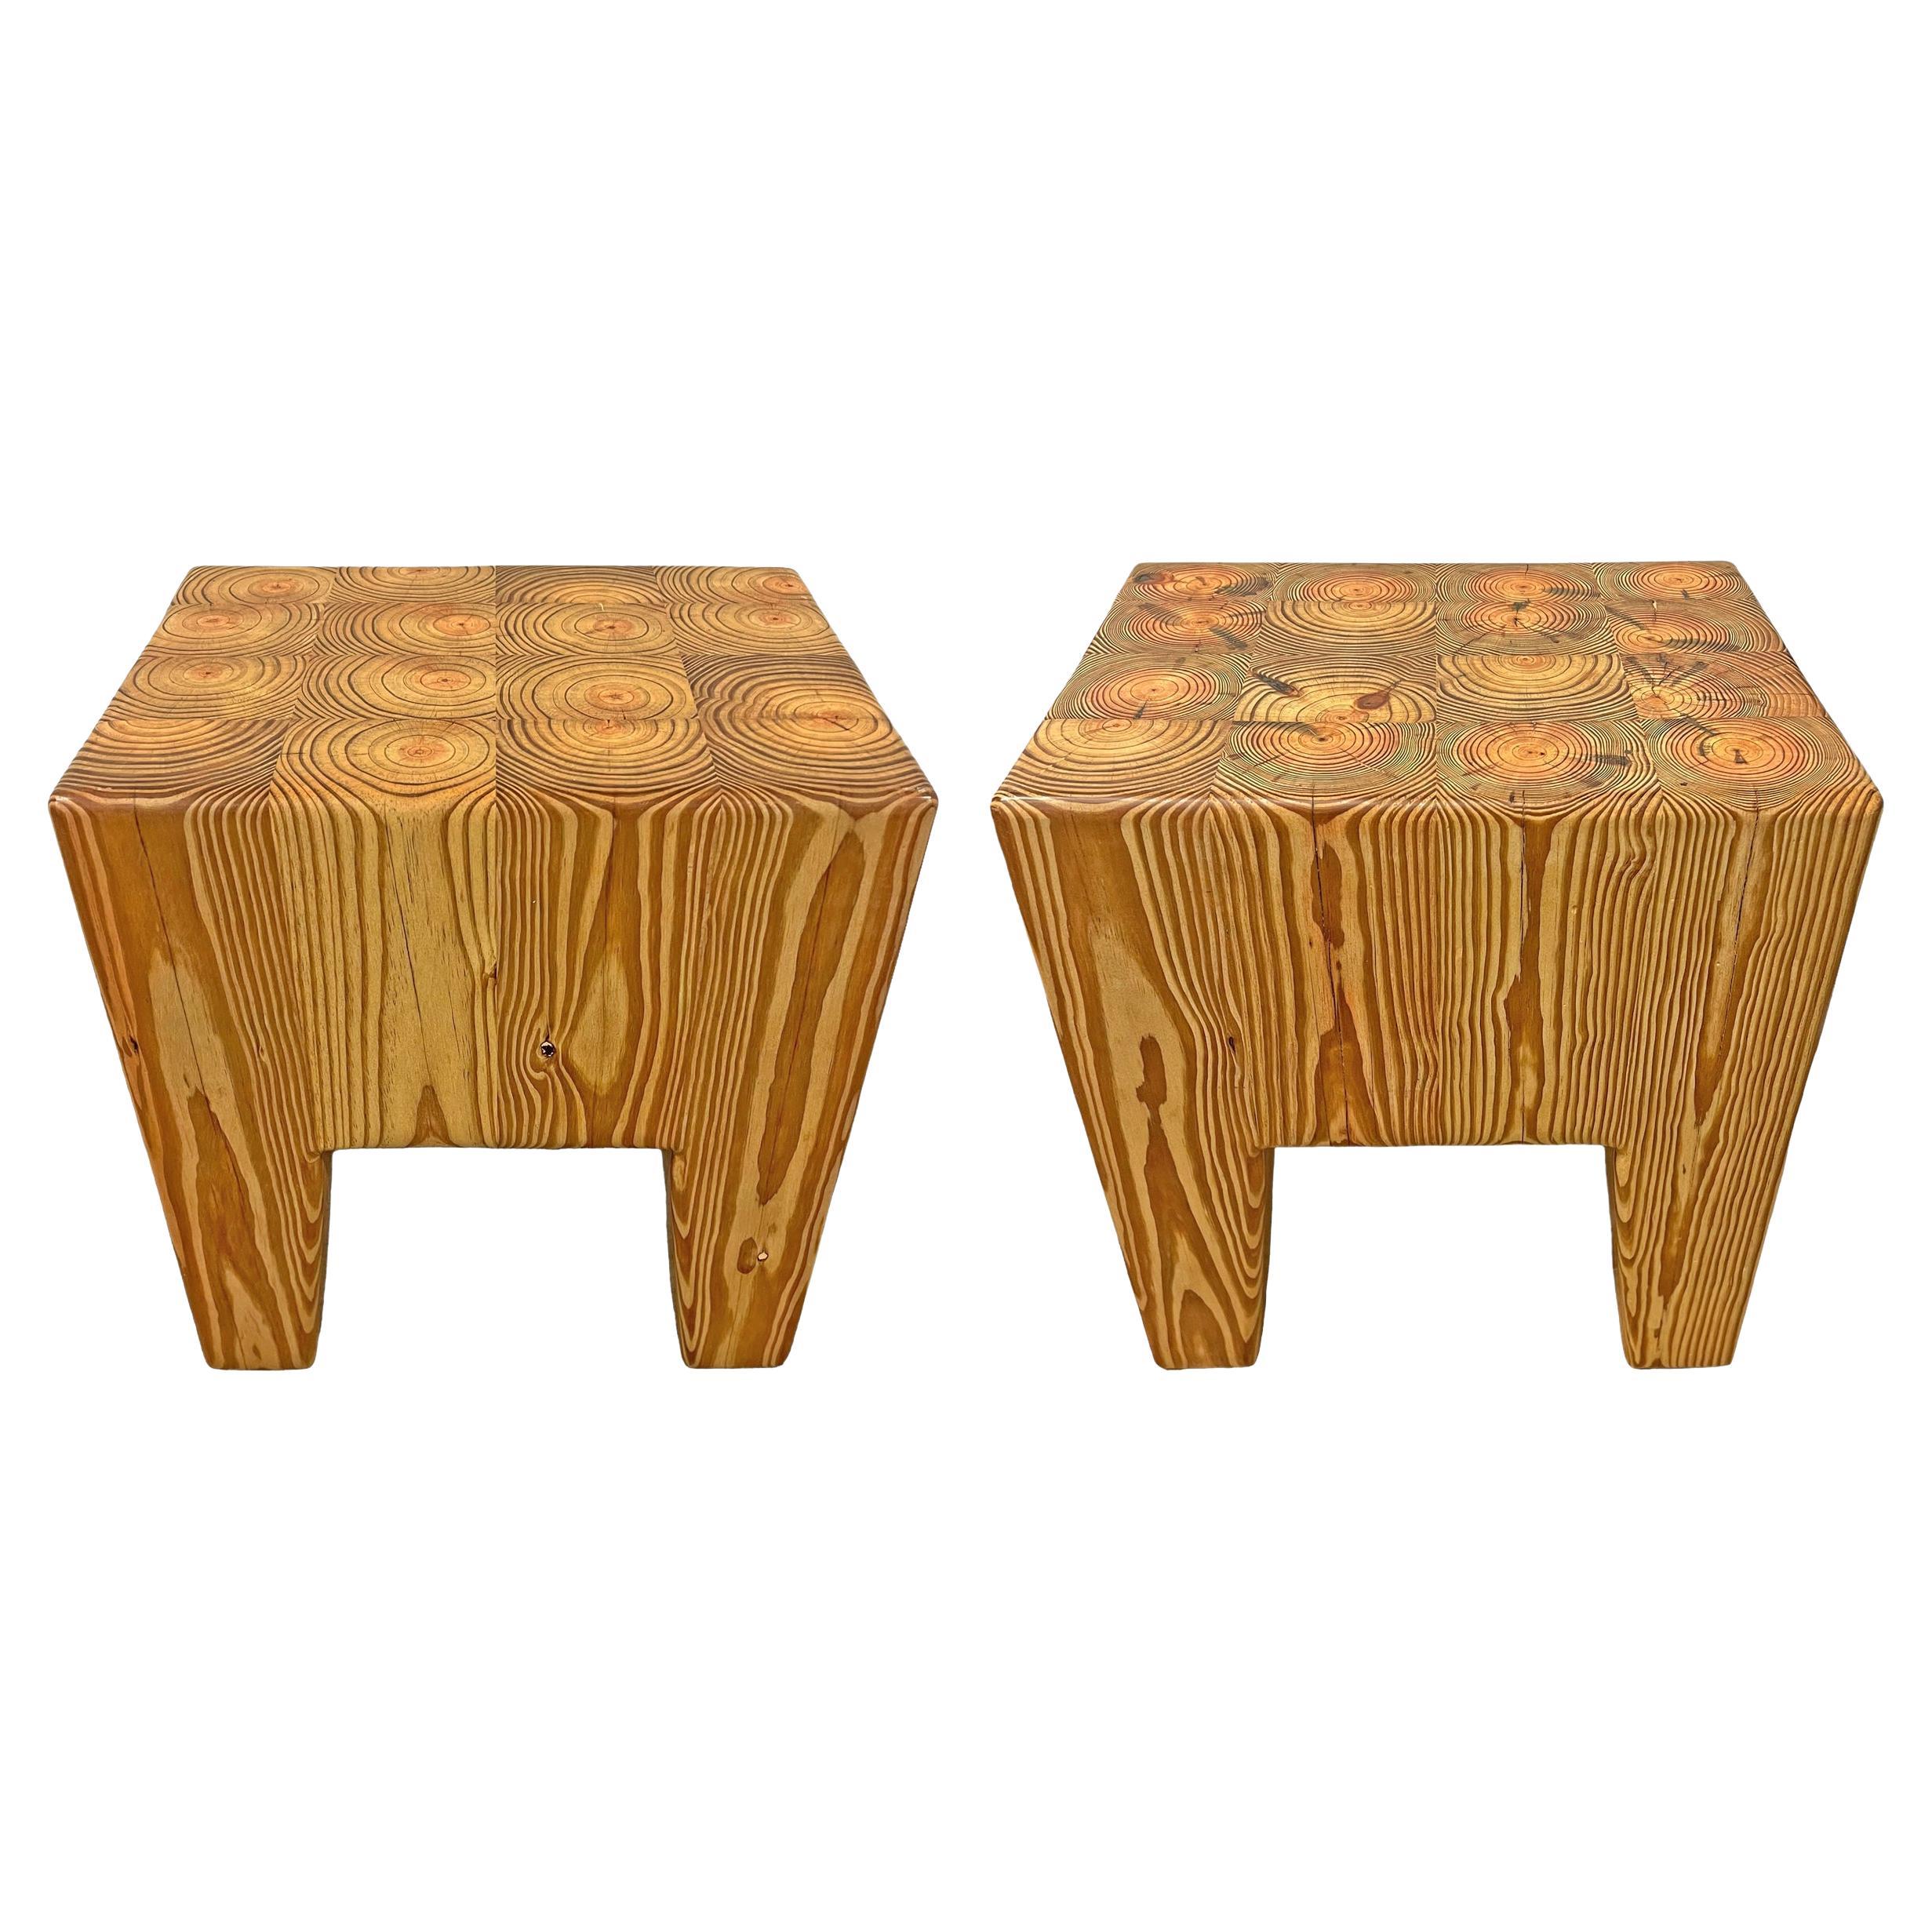 Pair of Modernist Pine Tables